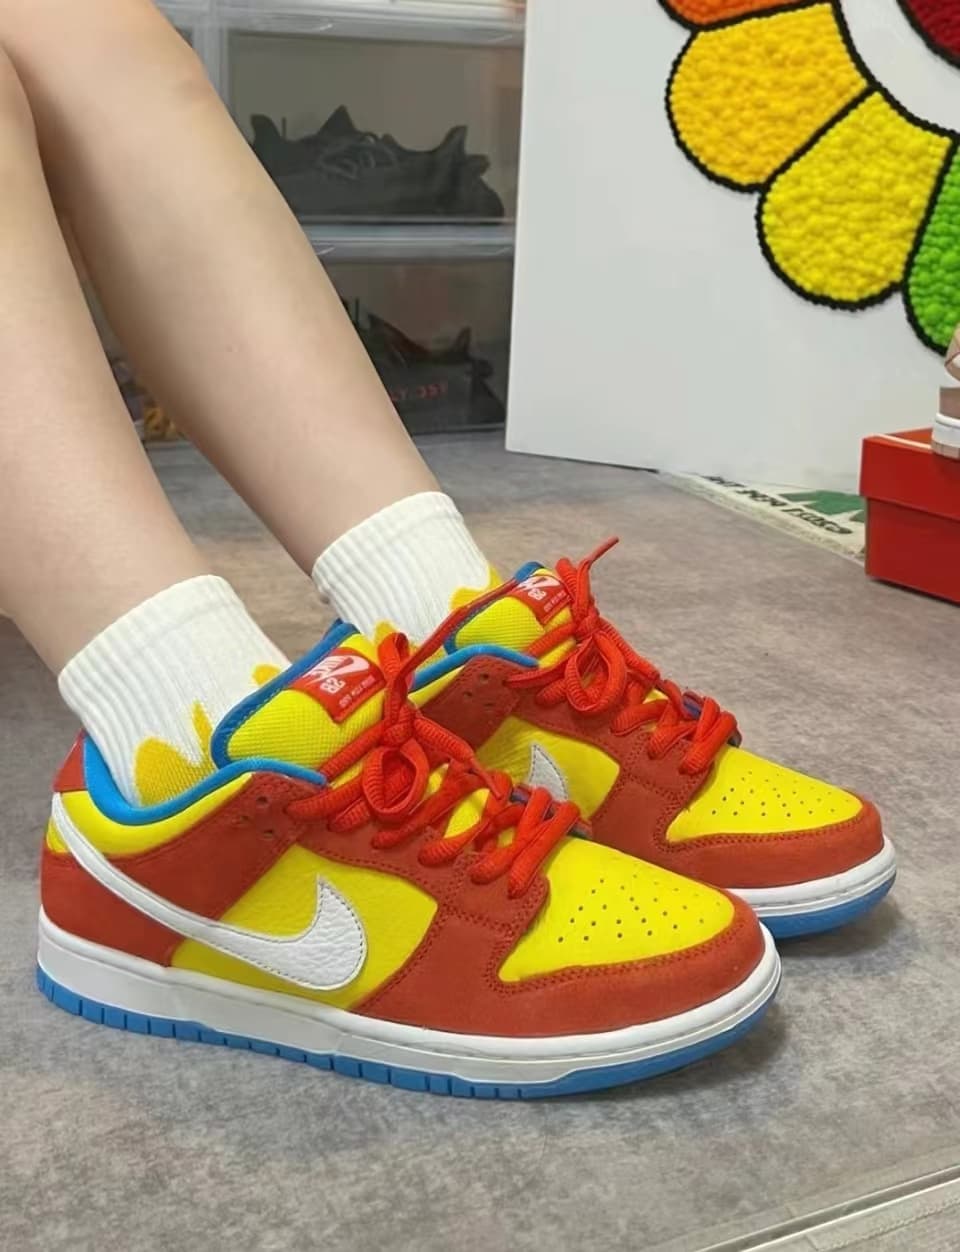 Nike Dunk Pro Bart Simpson Reps: A Tribute to Pop Culture